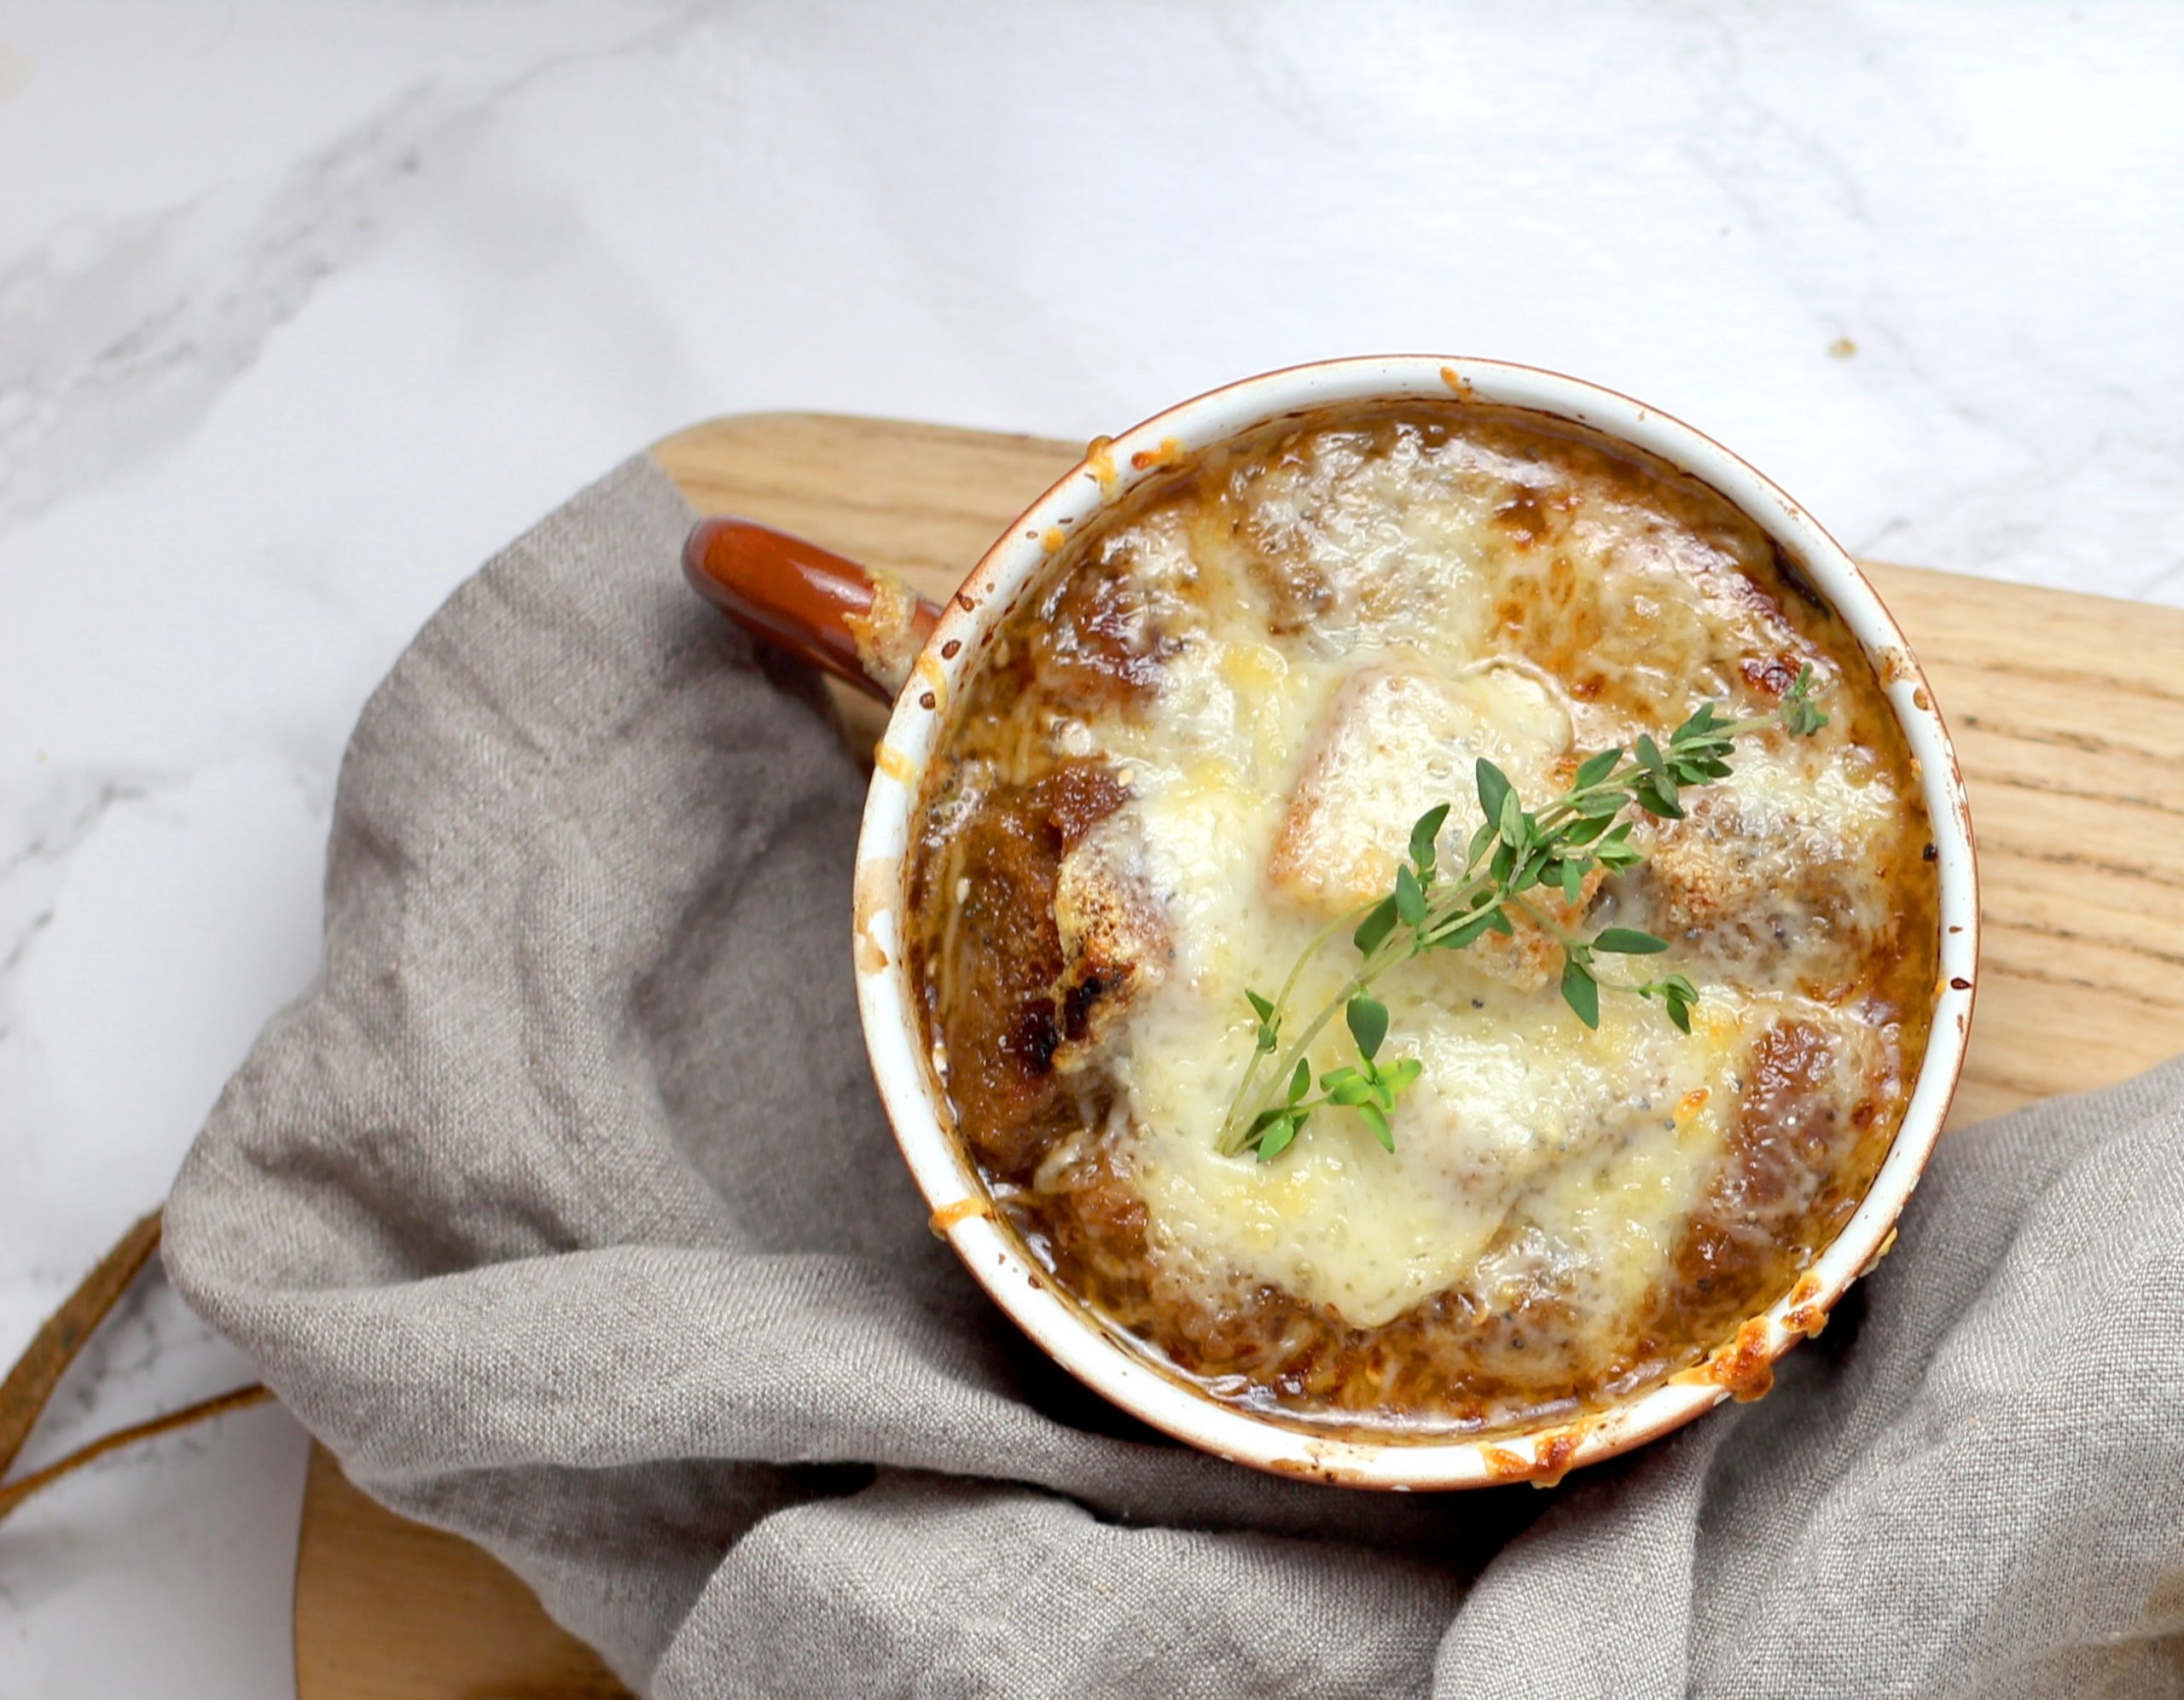 Food in Paris - French onion soup